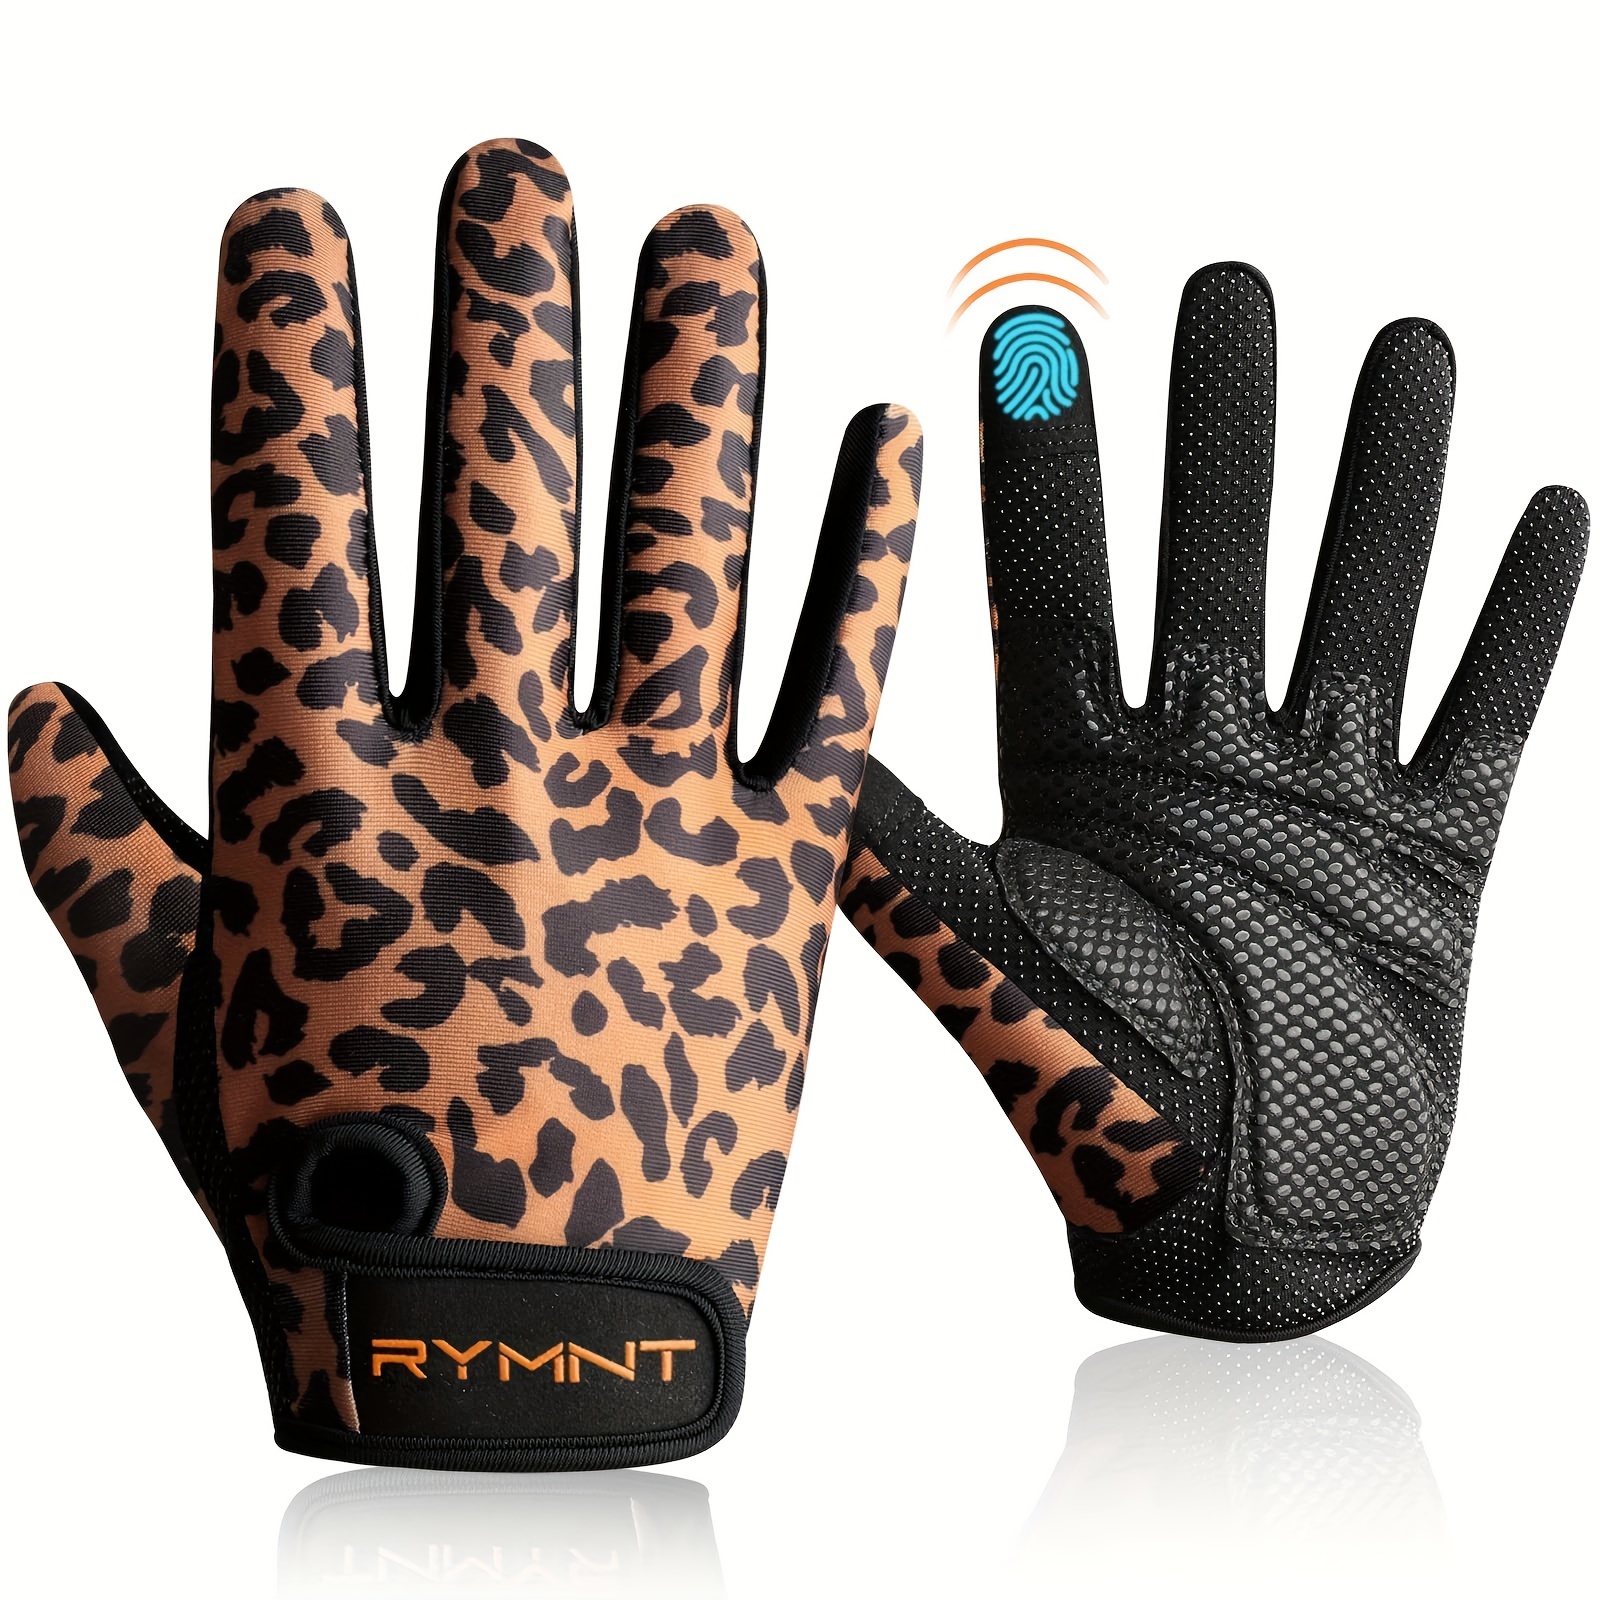 WOMEN AND MEN'S WEIGHT LIFTING GLOVES WITH EXCELLENT GRIP